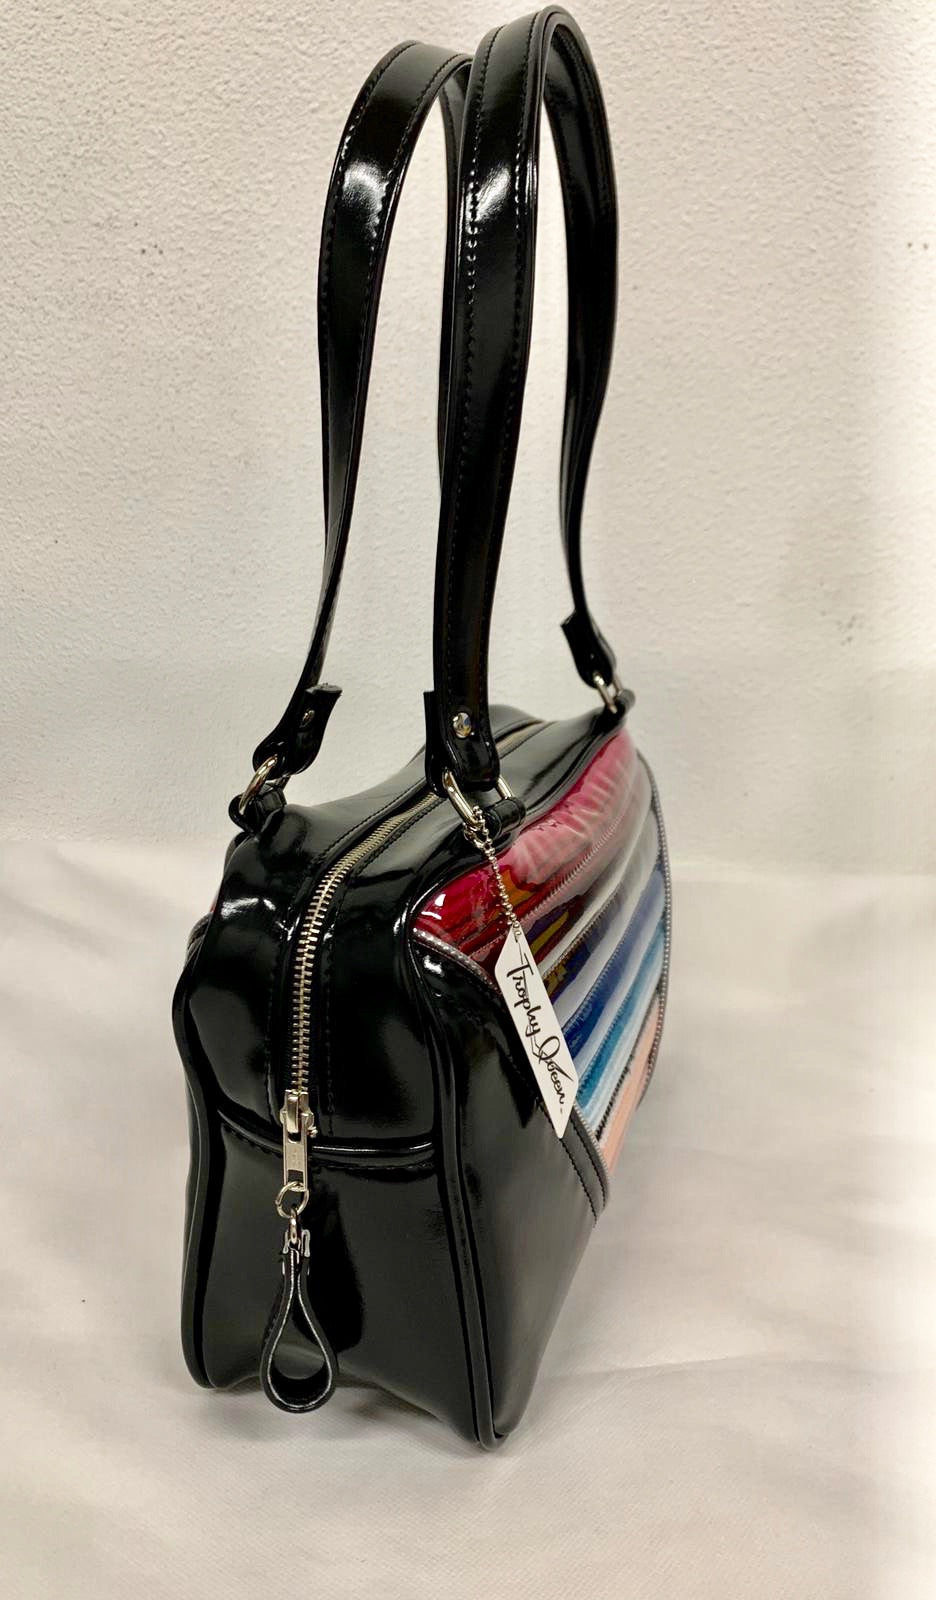 Comet Tote in Mexican blanket with clear overlay and grease black vinyl with plush leopard lining handcrafted in California with nickel hardware, an extra set of straps, vinyl zipper pull, inside open divided pocket, zipper pocket with serial number inside and signature Trophy Queen label.